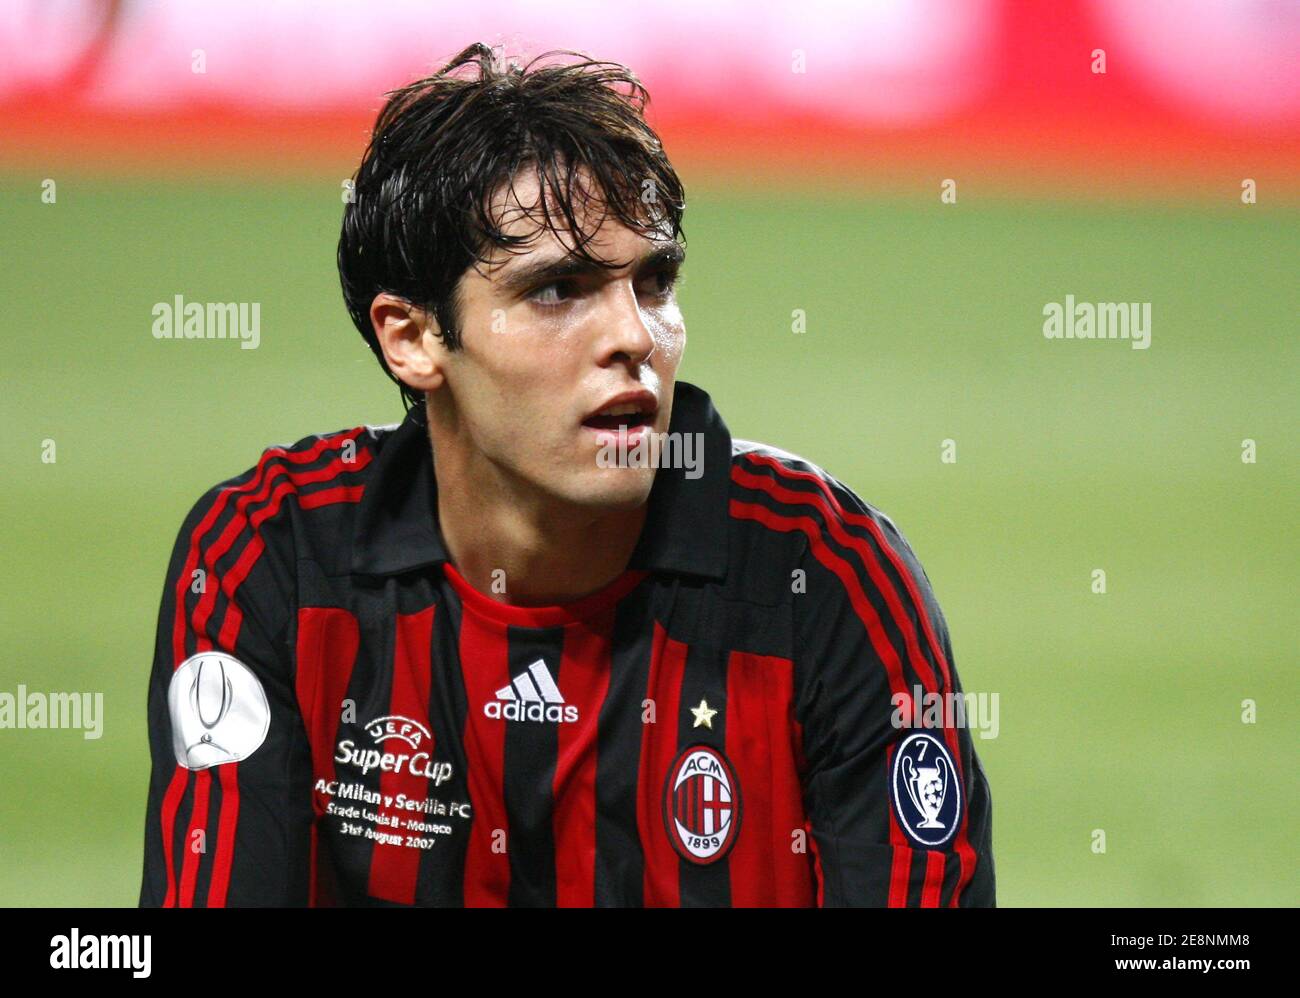 Ooze Udvalg vokal AC Milan's Kaka during the UEFA Super Cup tournament, AC Milan vs FC  Sevilla at the Louis II Stadium in Monaco on August 31, 2007. AC Milan won  3-1. Photo by Christian